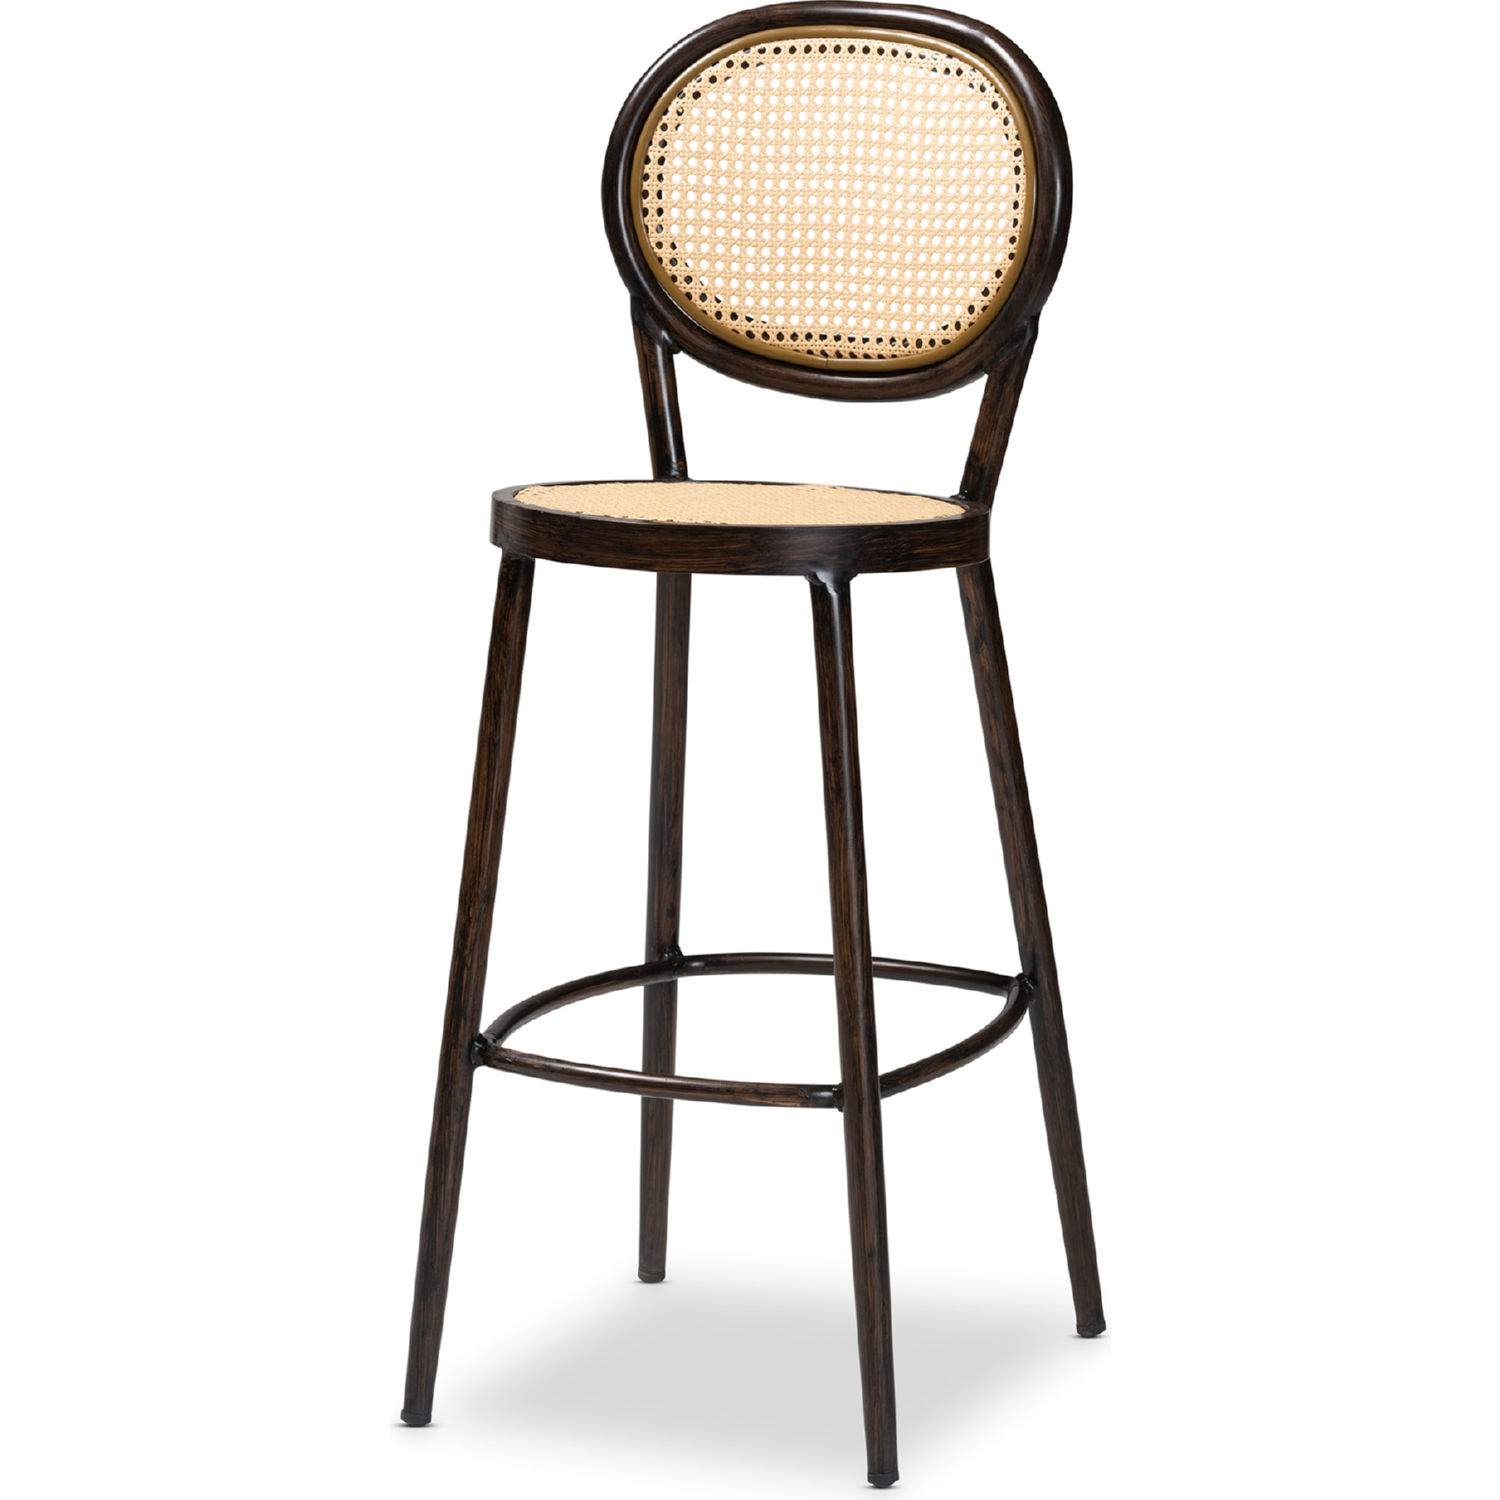 Joyside Patio Bar Stool 25.6 INCH Height Indoor-Outdoor Square Bar Counter Stool with Foot Rest Bar Chair for Patio